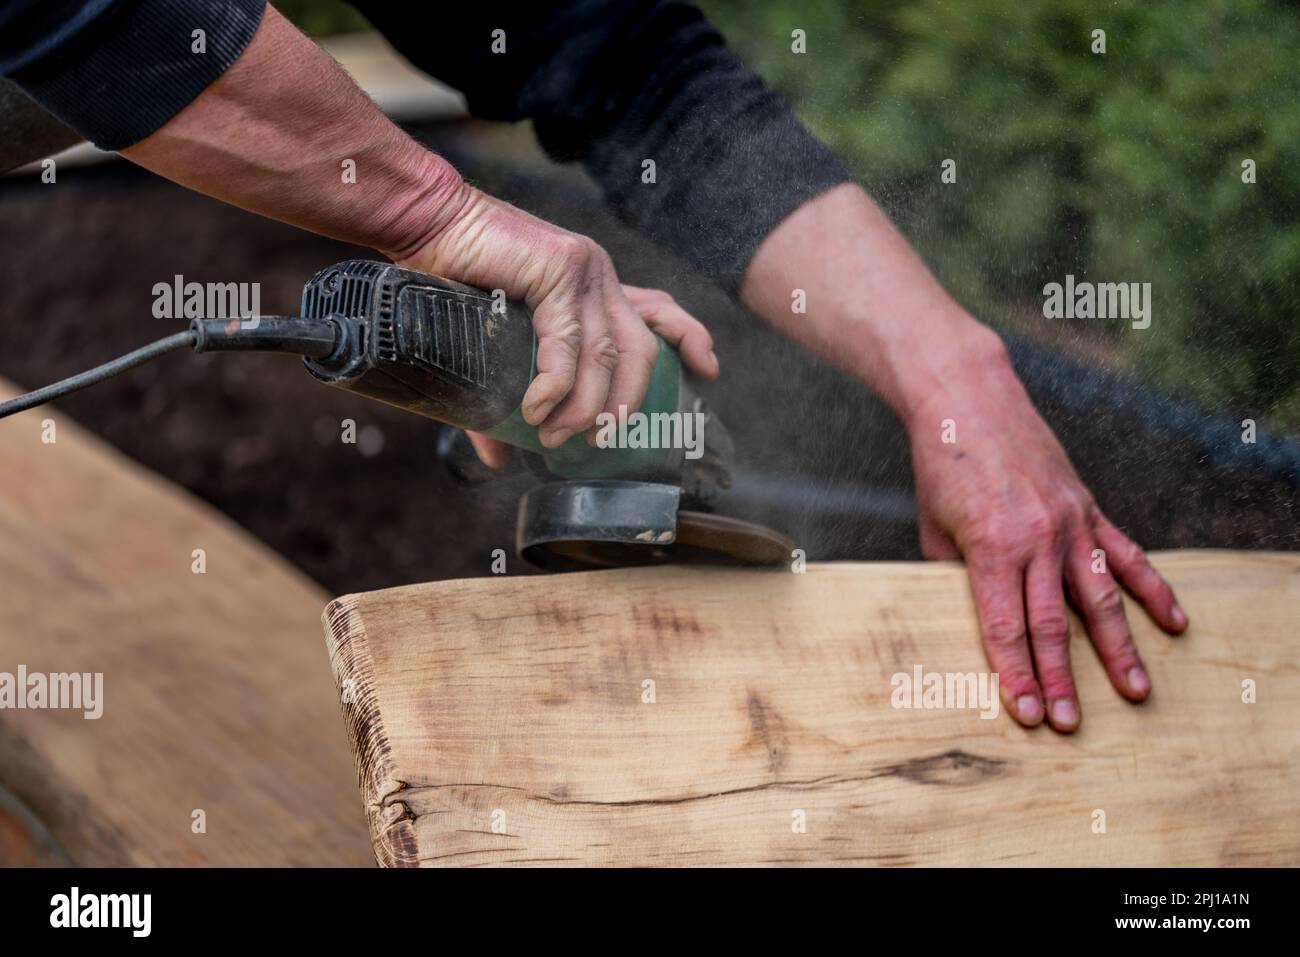 A carpenter is grinding a wooden part with an electric sander. Stock Photo